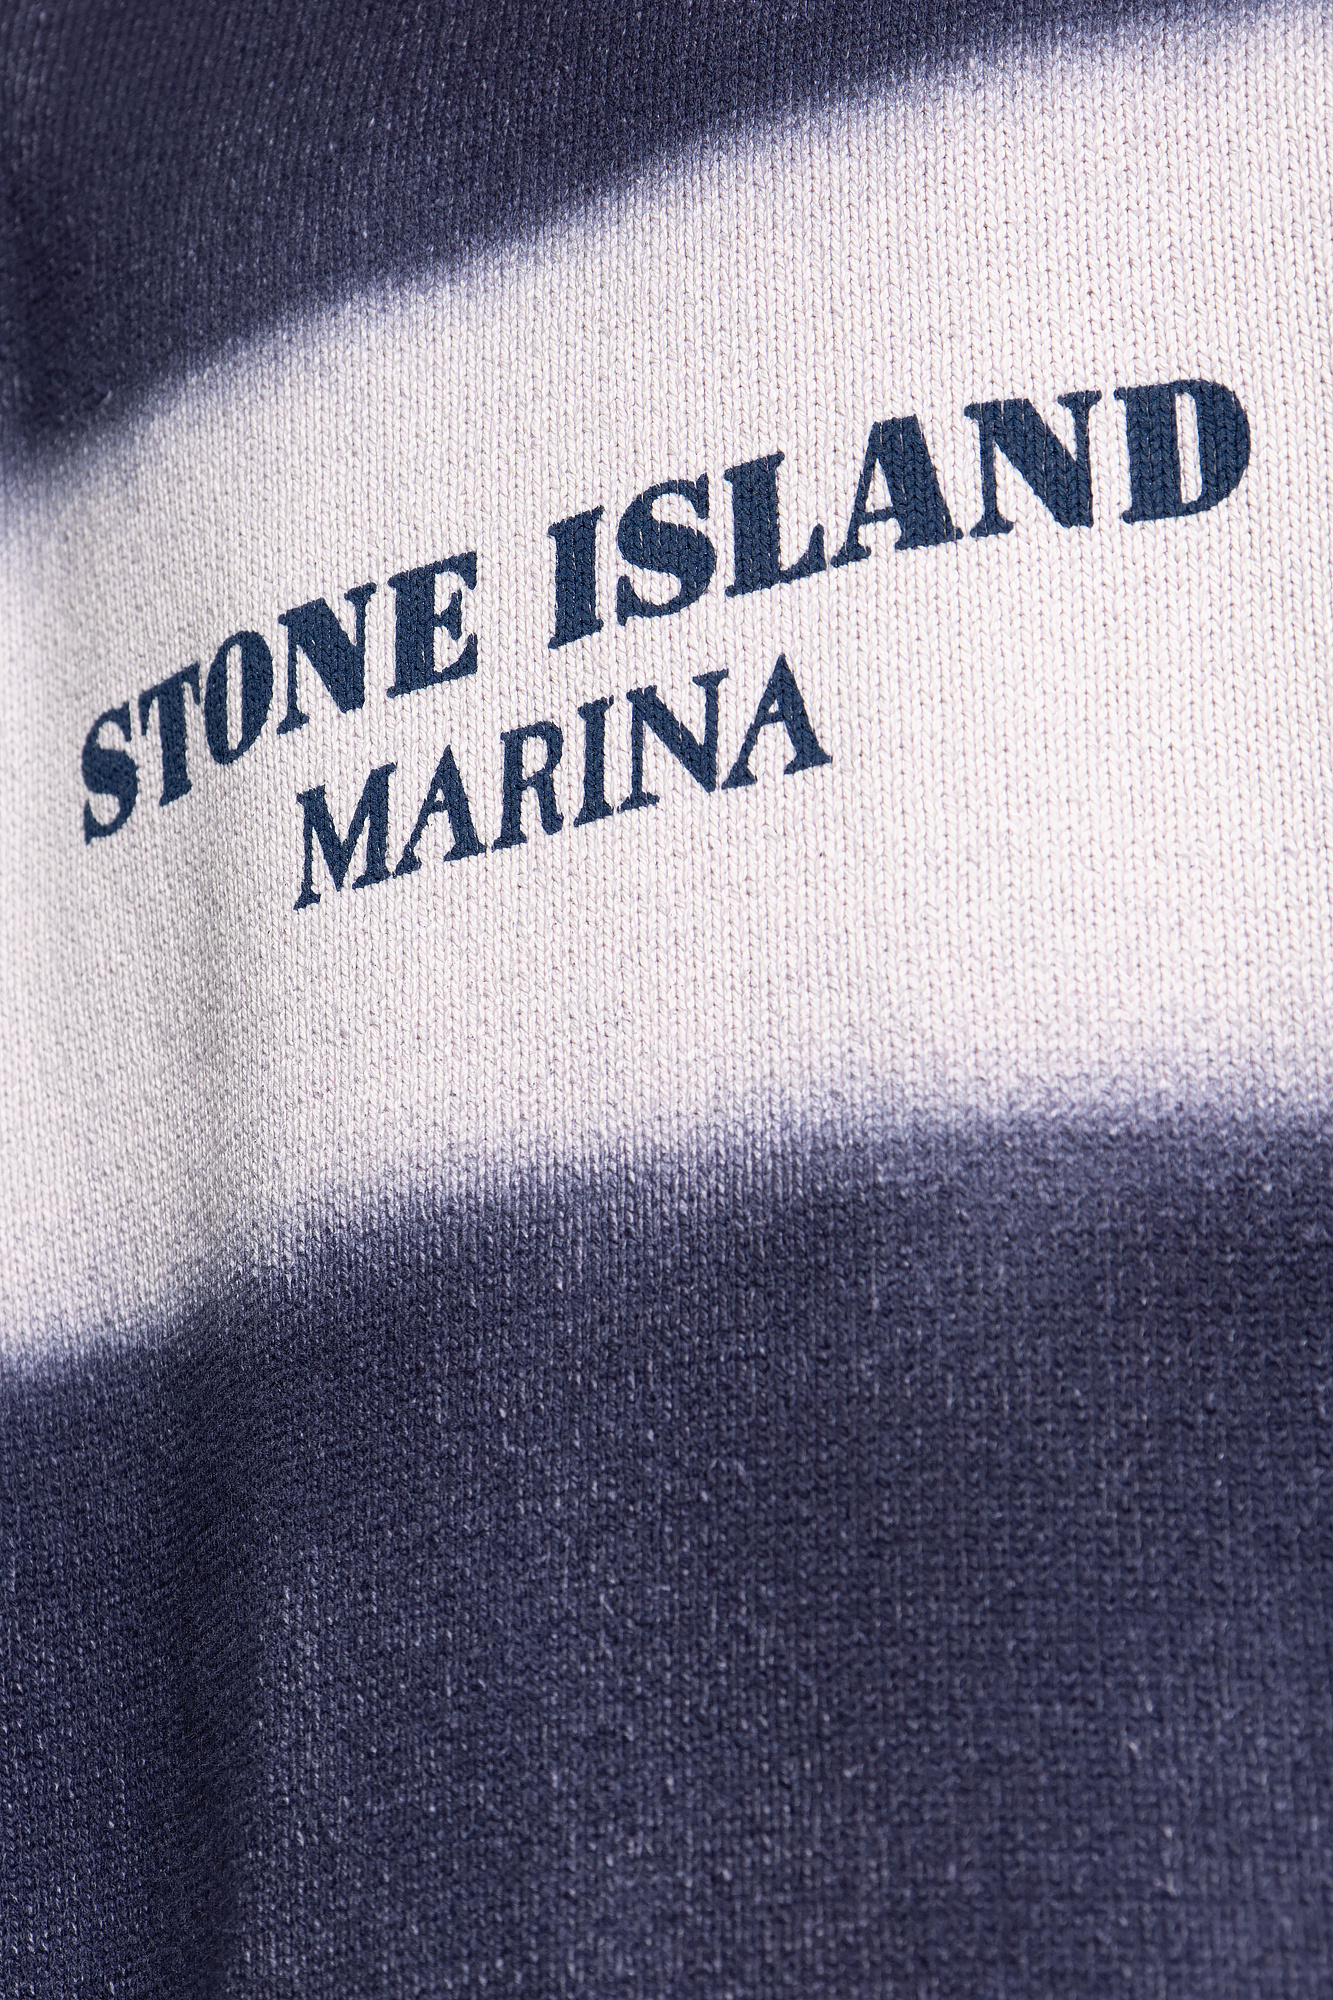 Stone Island Sweater from the 'Marina' collection | Men's Clothing | Vitkac